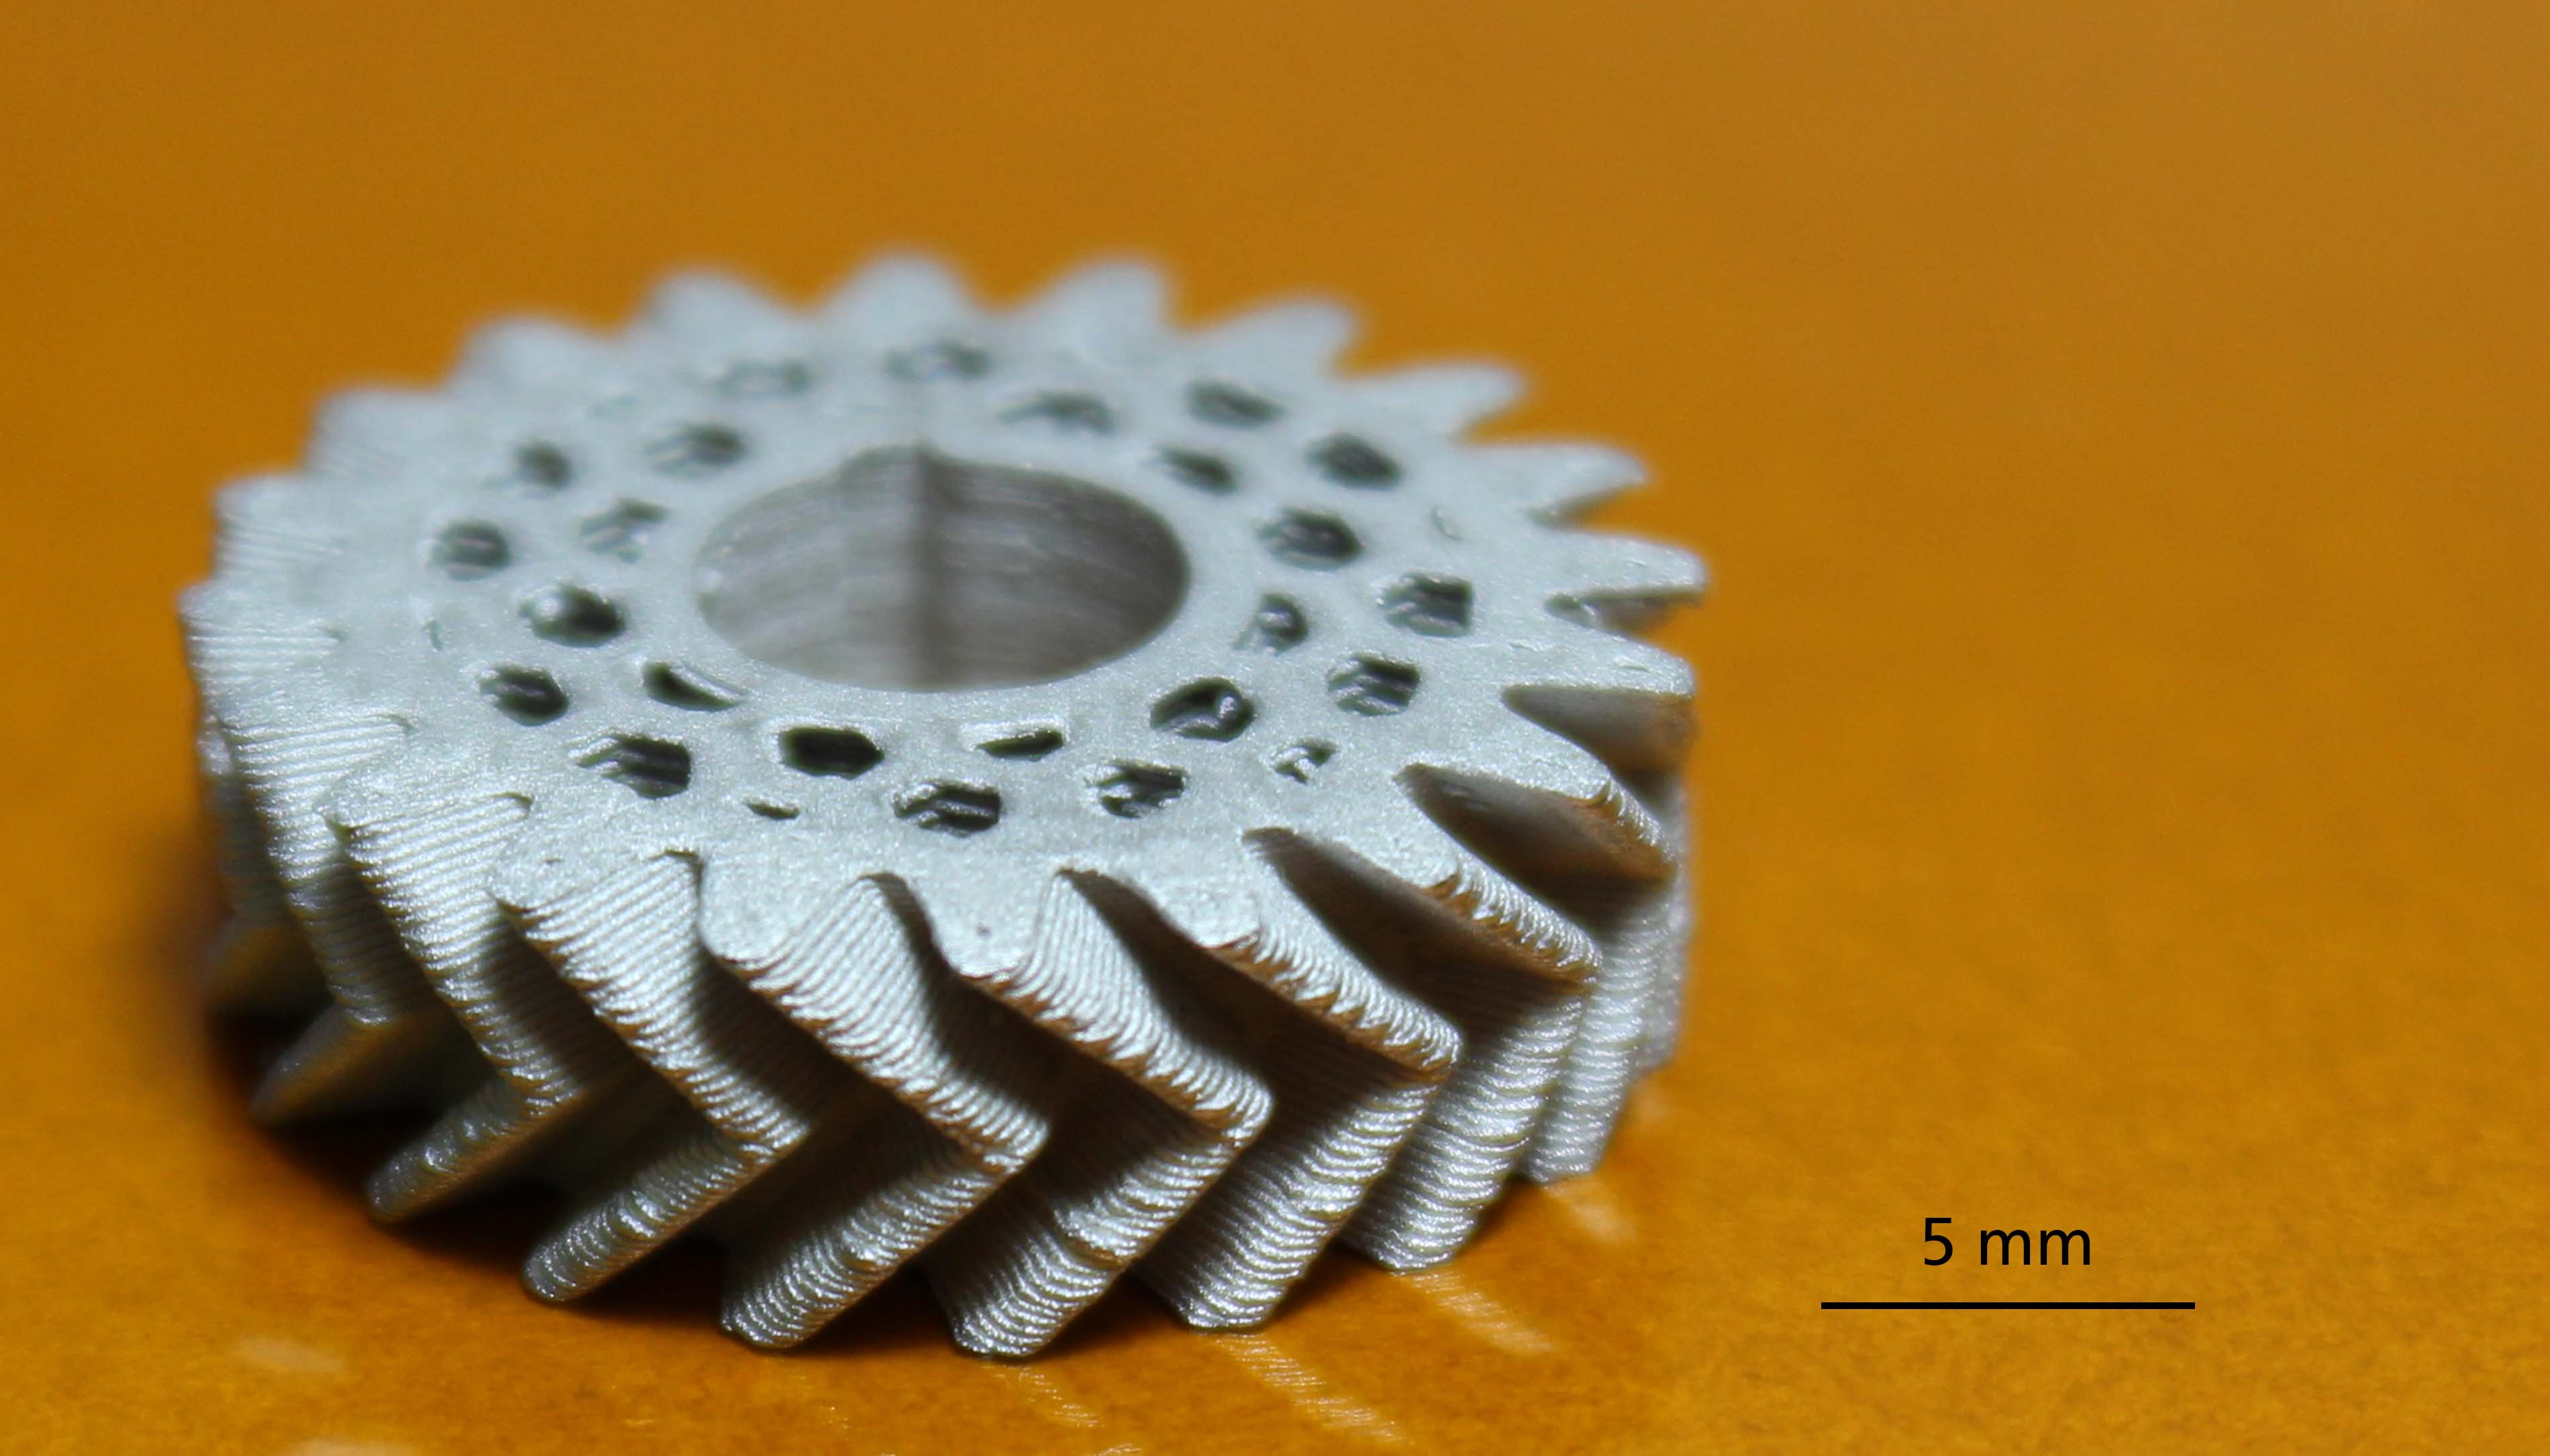 Fused Filament Fabricarion - Printed and Sintered Gear Wheel